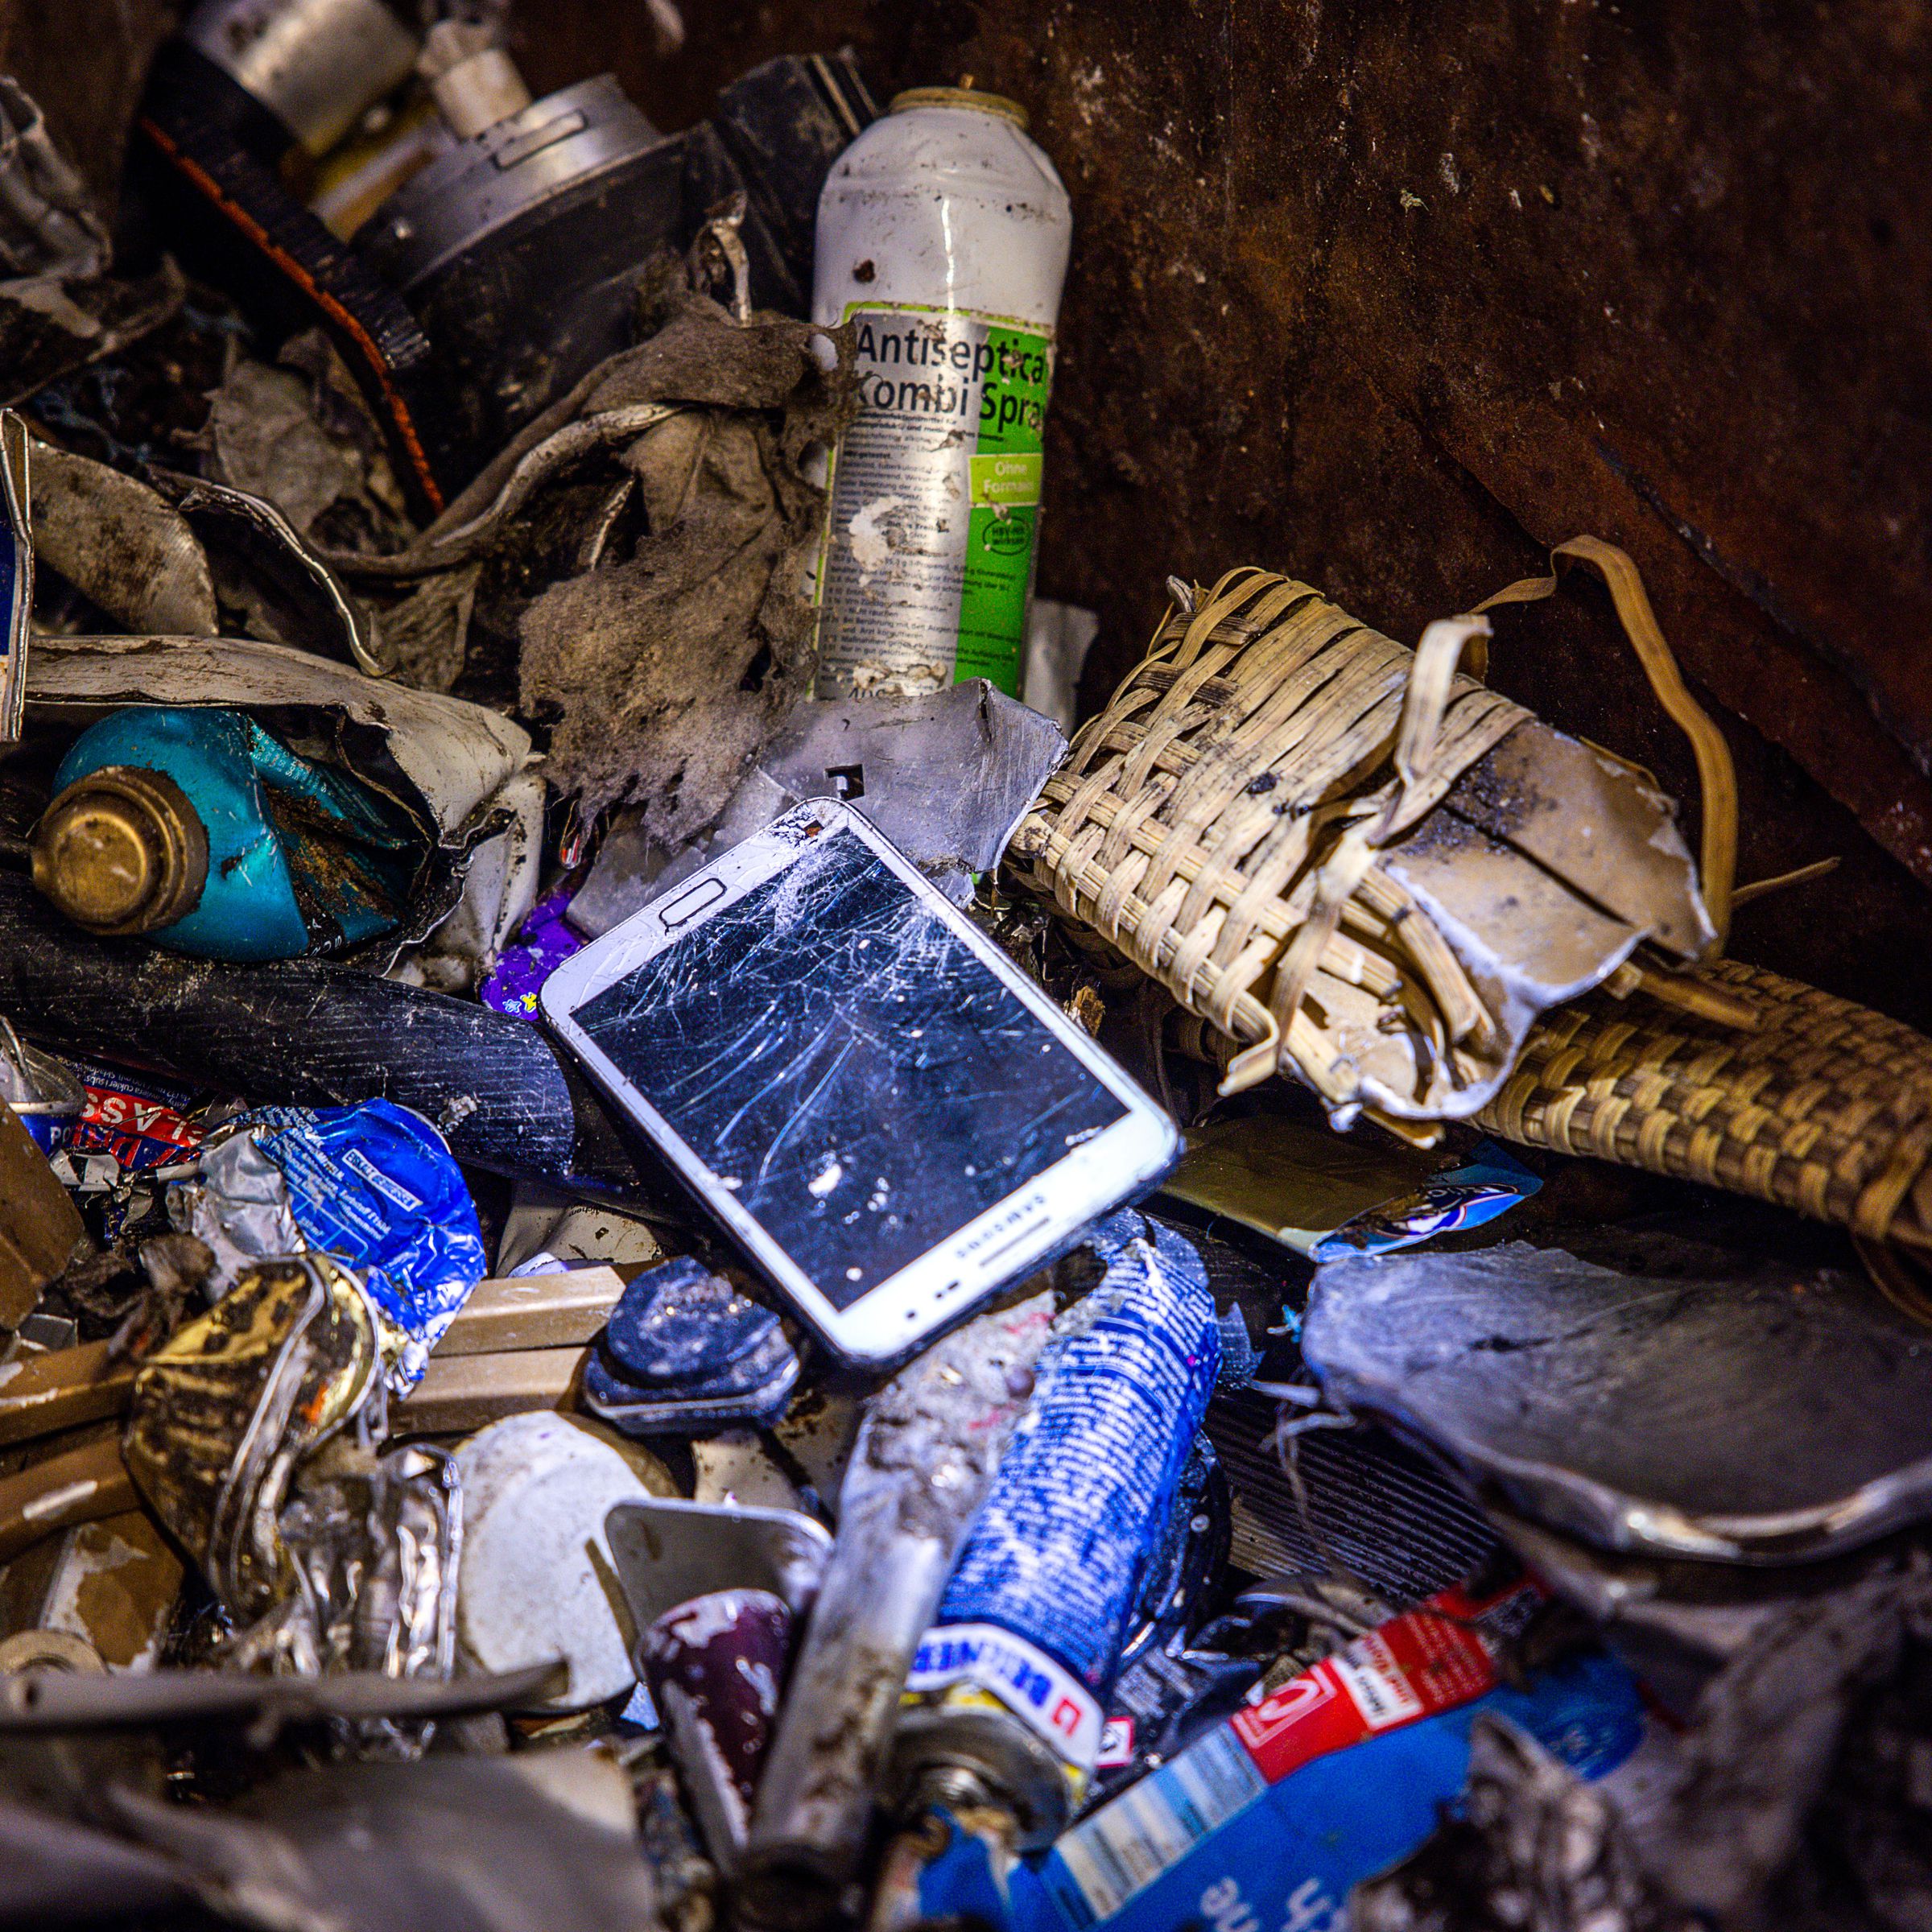 A cellphone with a cracked screen seen in a pile of trash.